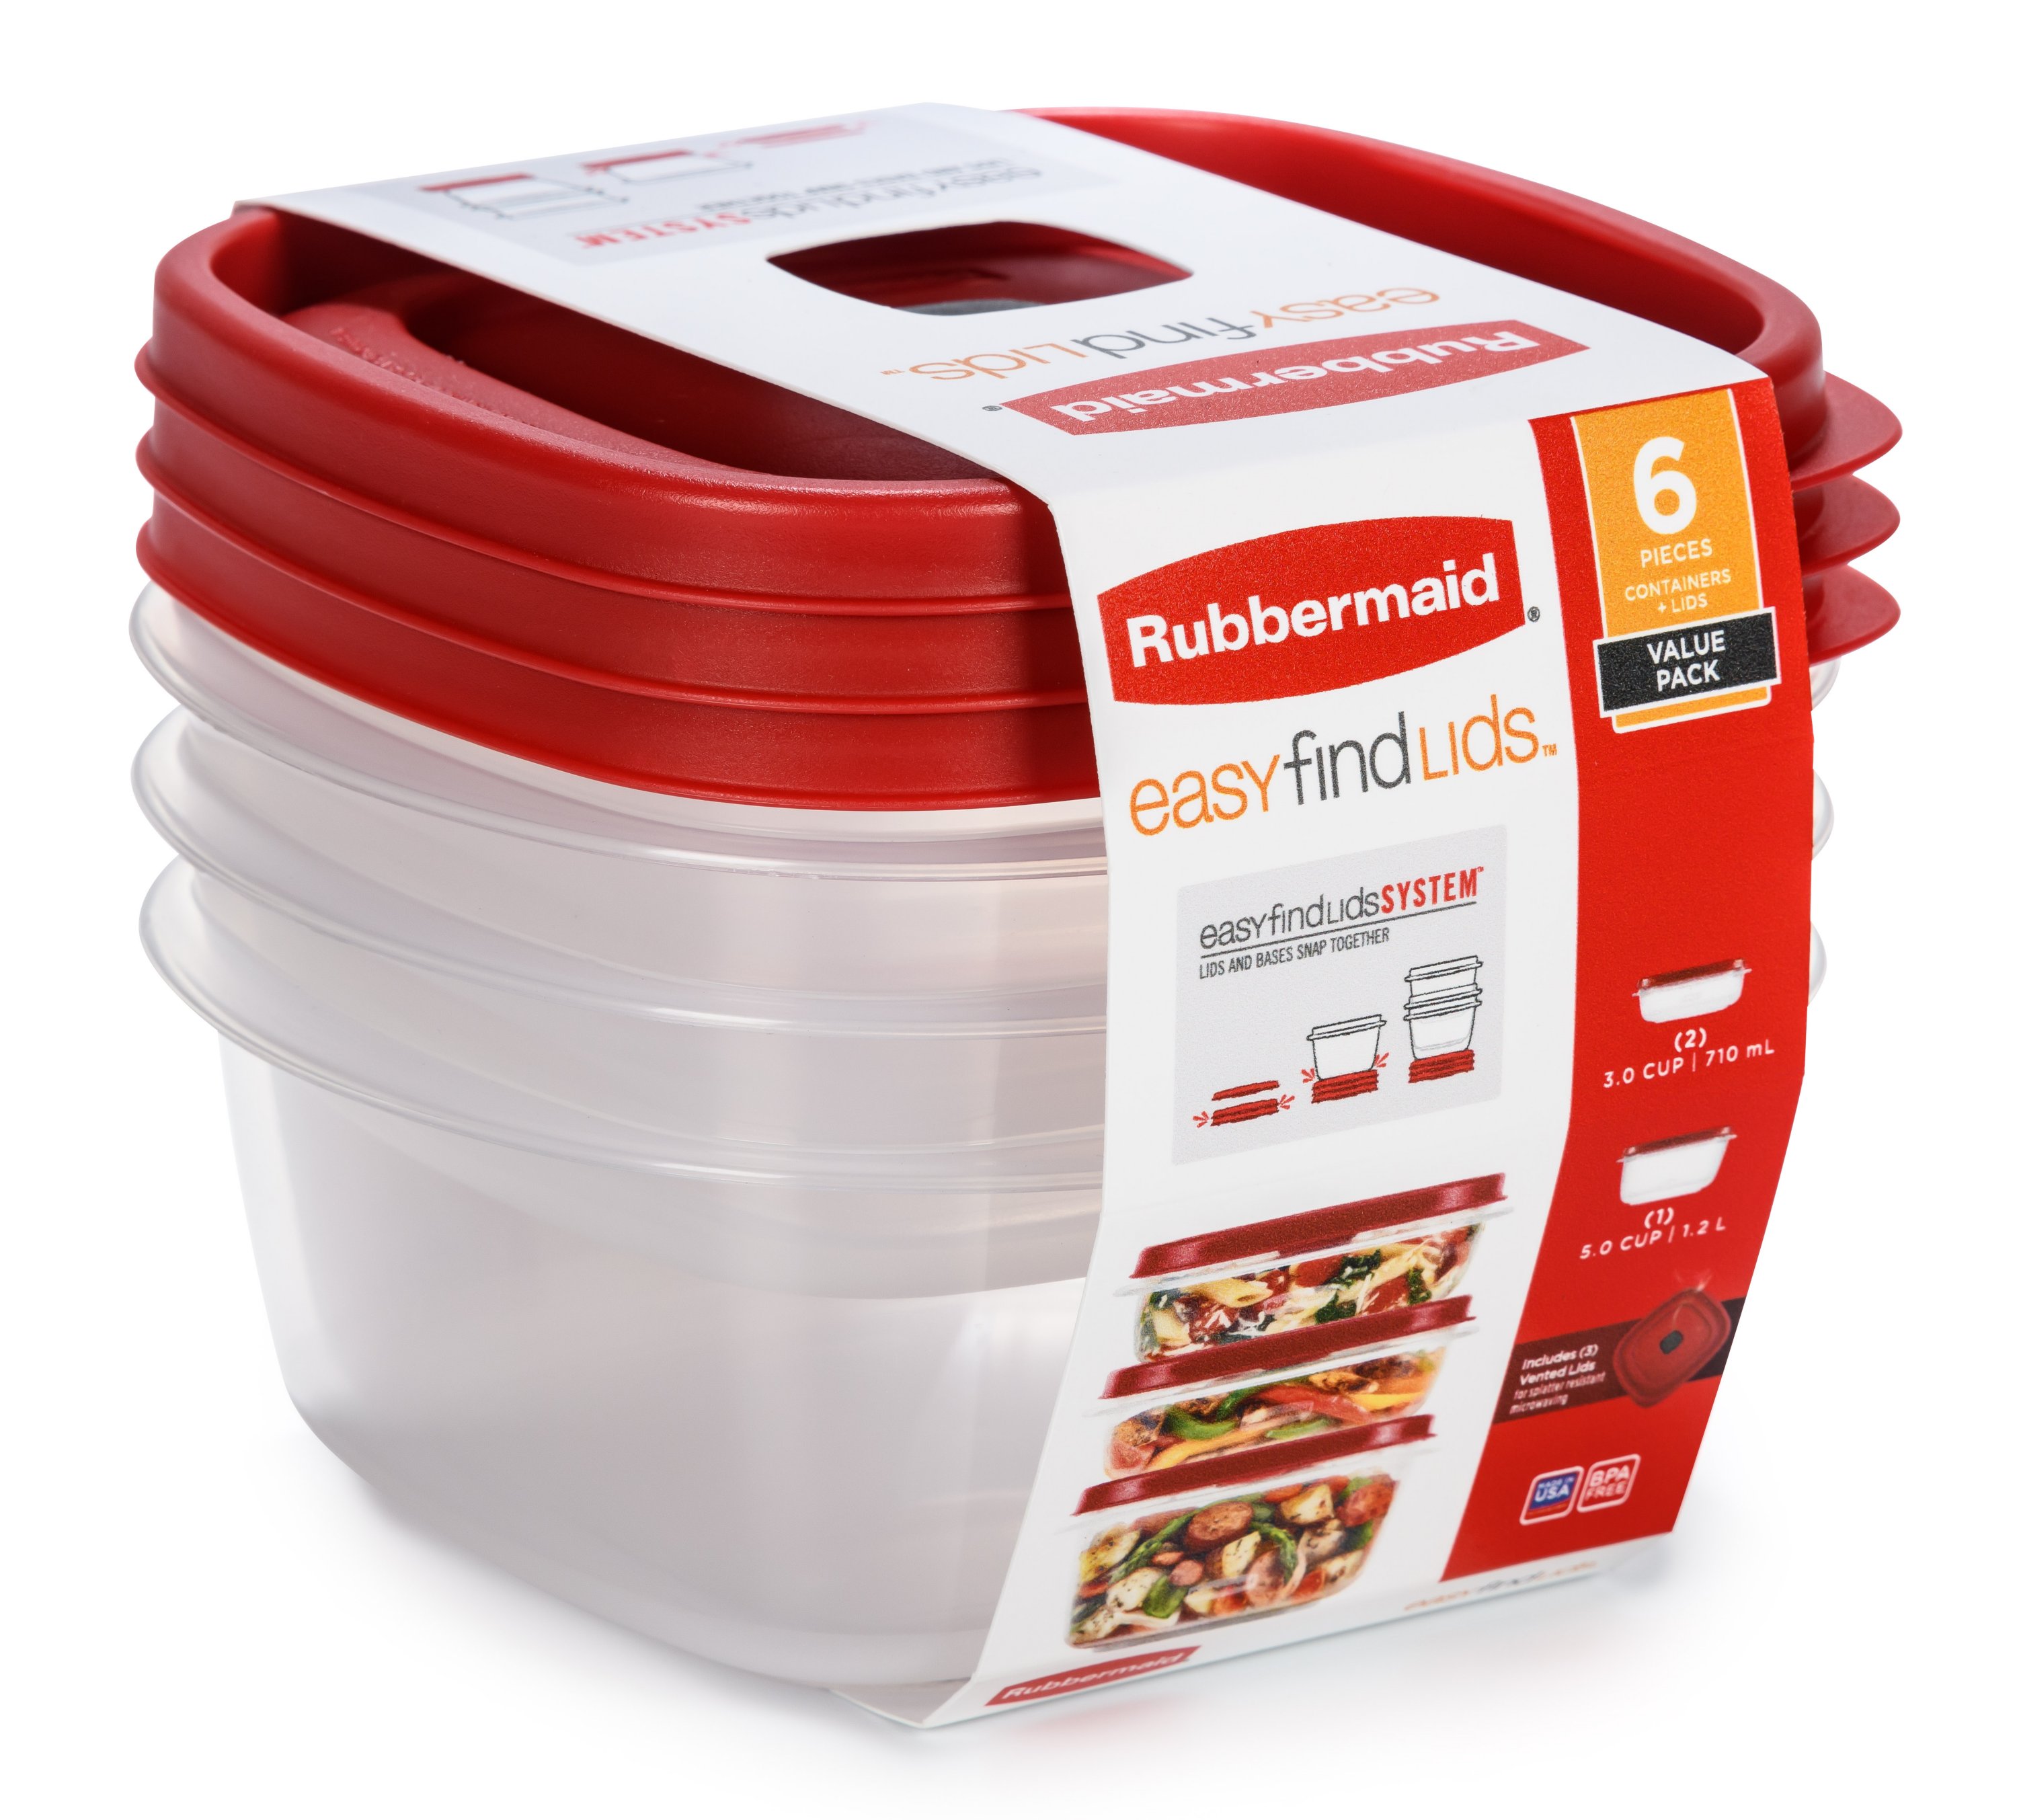 Rubbermaid Easy-Find Lids Food Storage Container - Red/Clear, 2.5